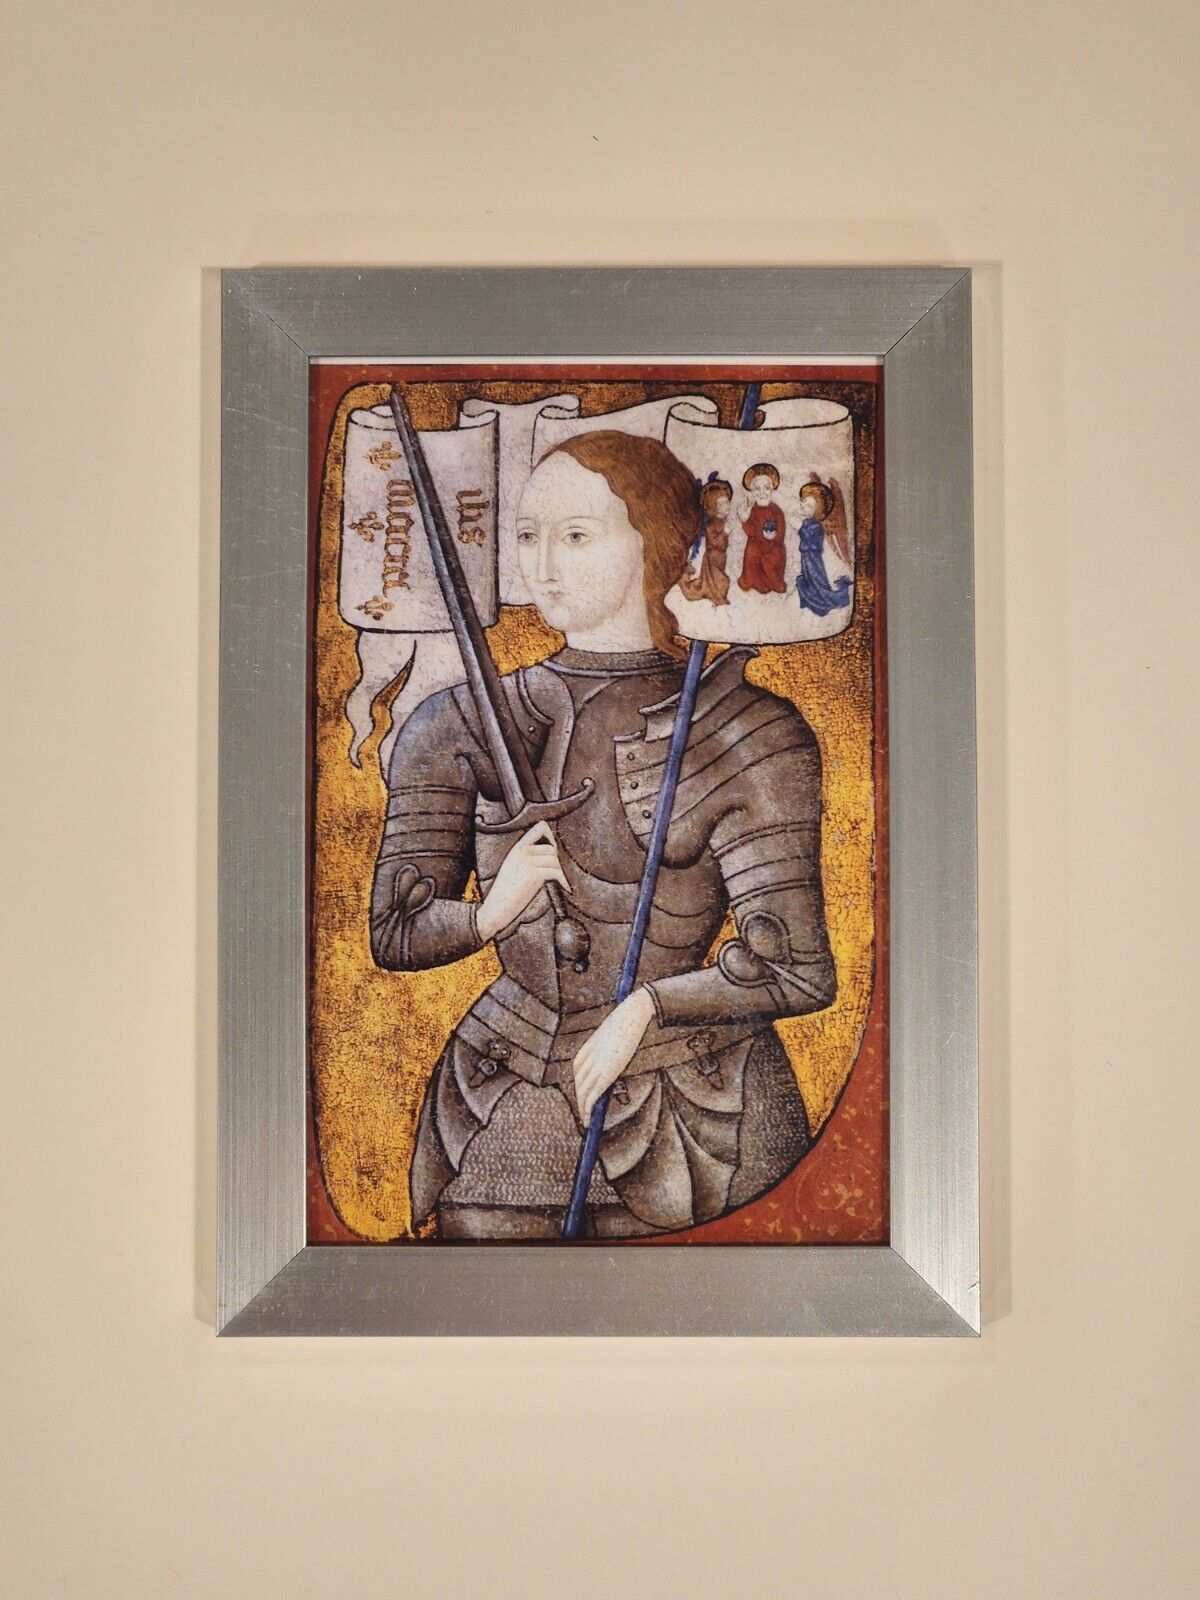 St Joan of Arc, small framed art print of medieval French Catholic saint